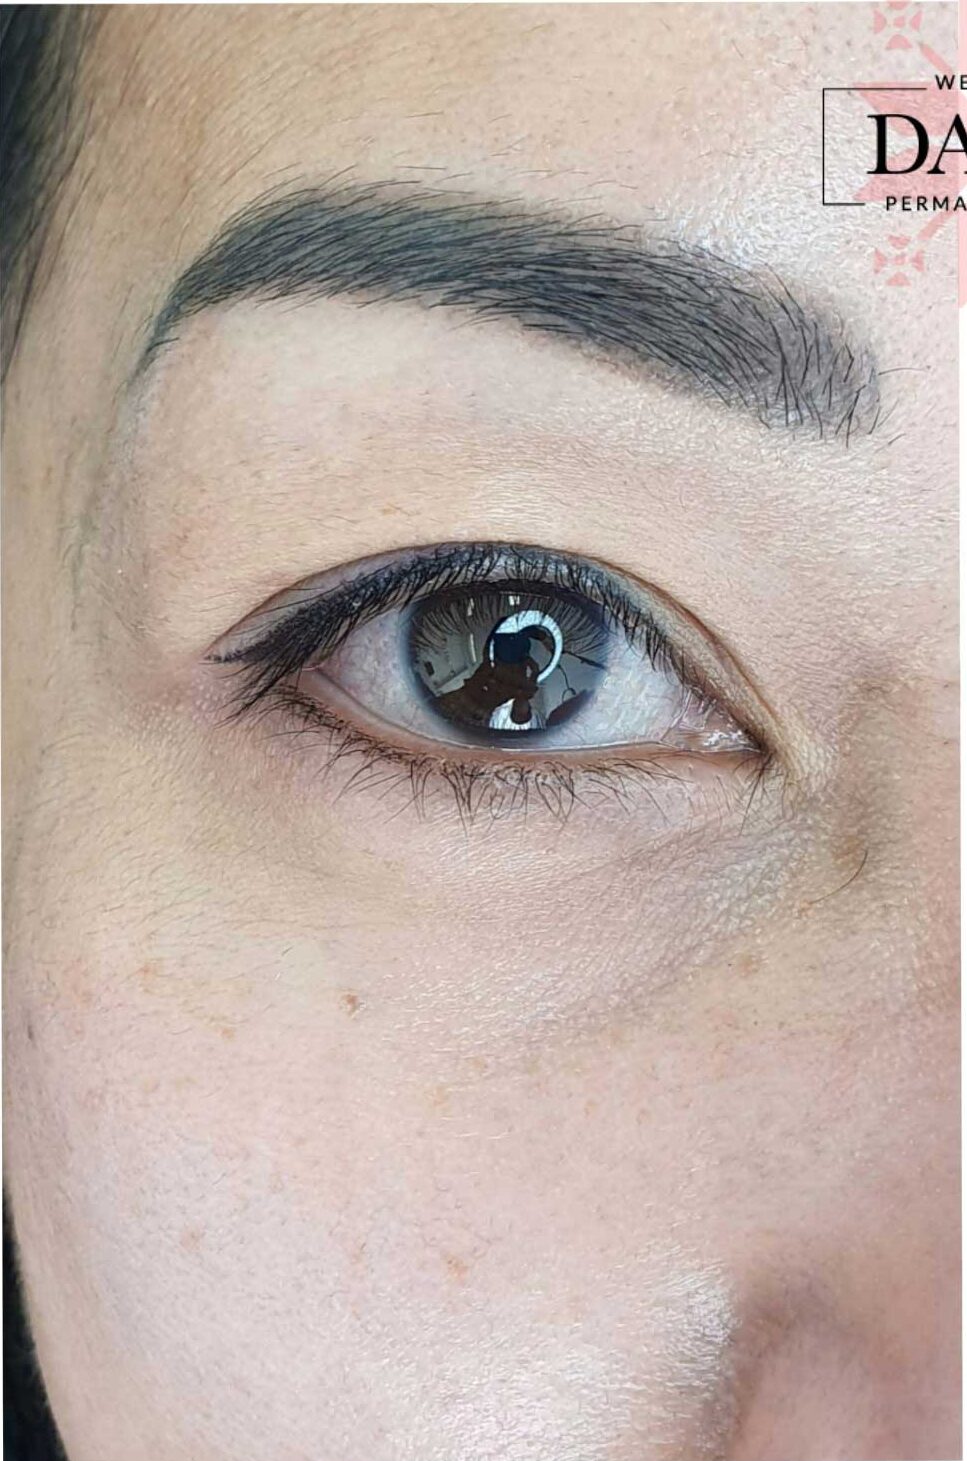 Thin Eyeliner & Bottom LashLine, Brows Cosmetic Tattoo. Cosmetic and Mediical Tattoo by Dasha. Permanent makeup and reconstructive tattoo, scalp micro-pigmentation in Christchurch, New Zealand